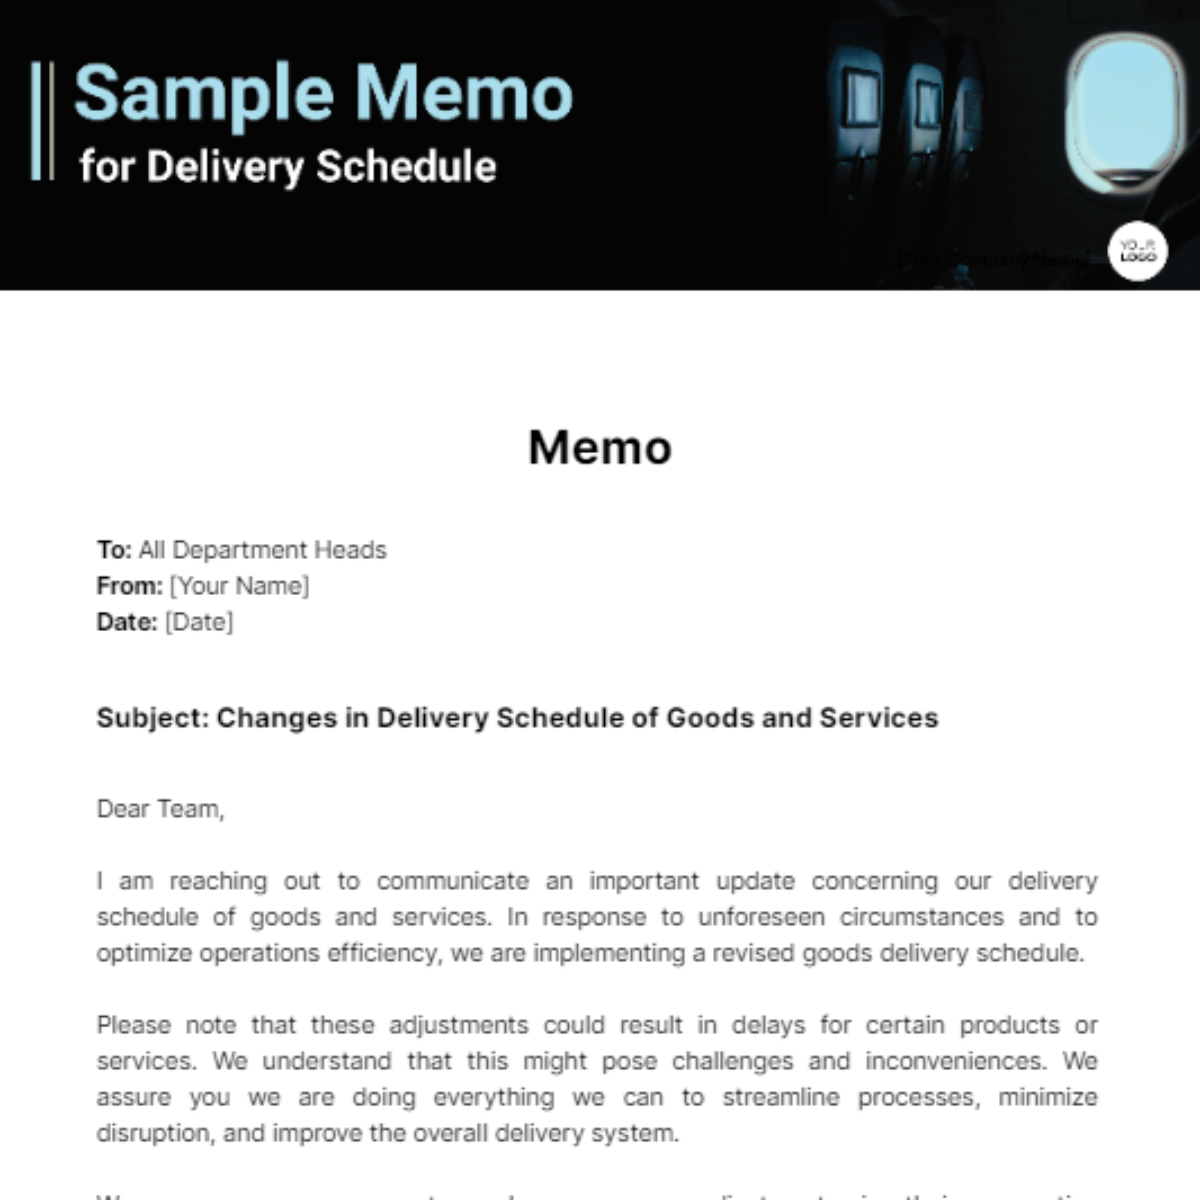 Sample Memo for Delivery Schedule